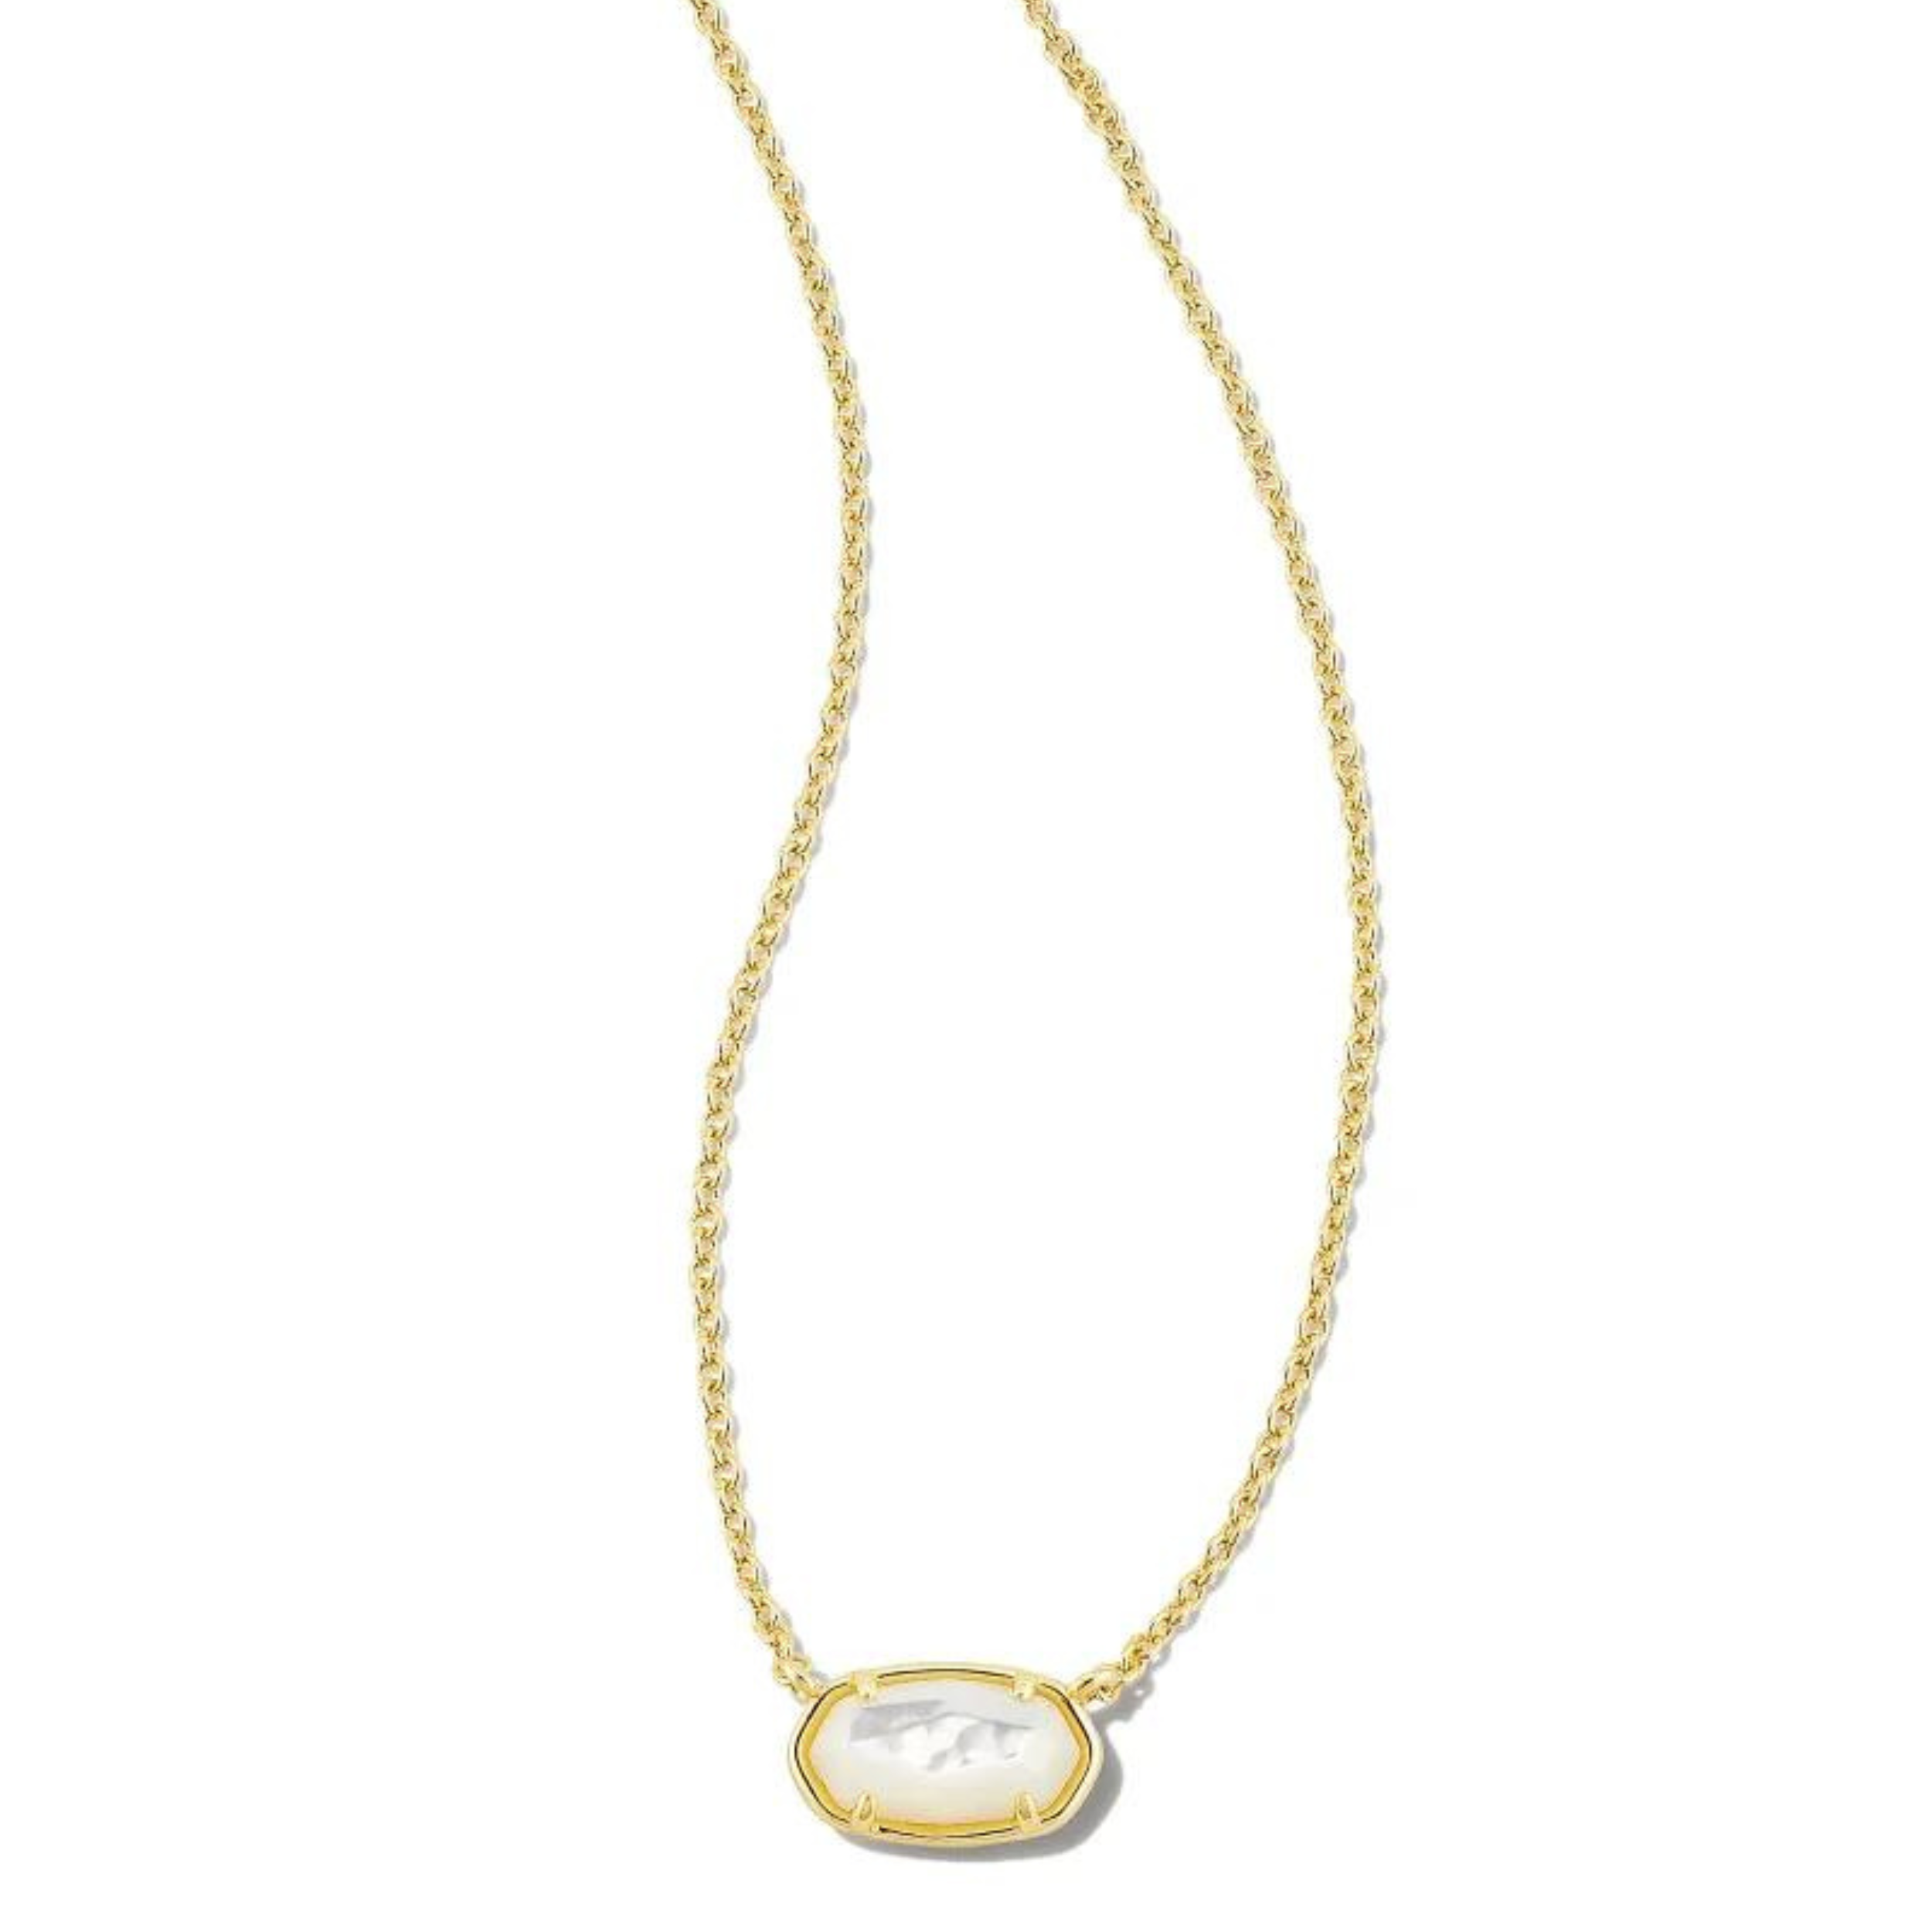 Gold chain necklace with ivory mother of pearl pendant, pictured on a white background.